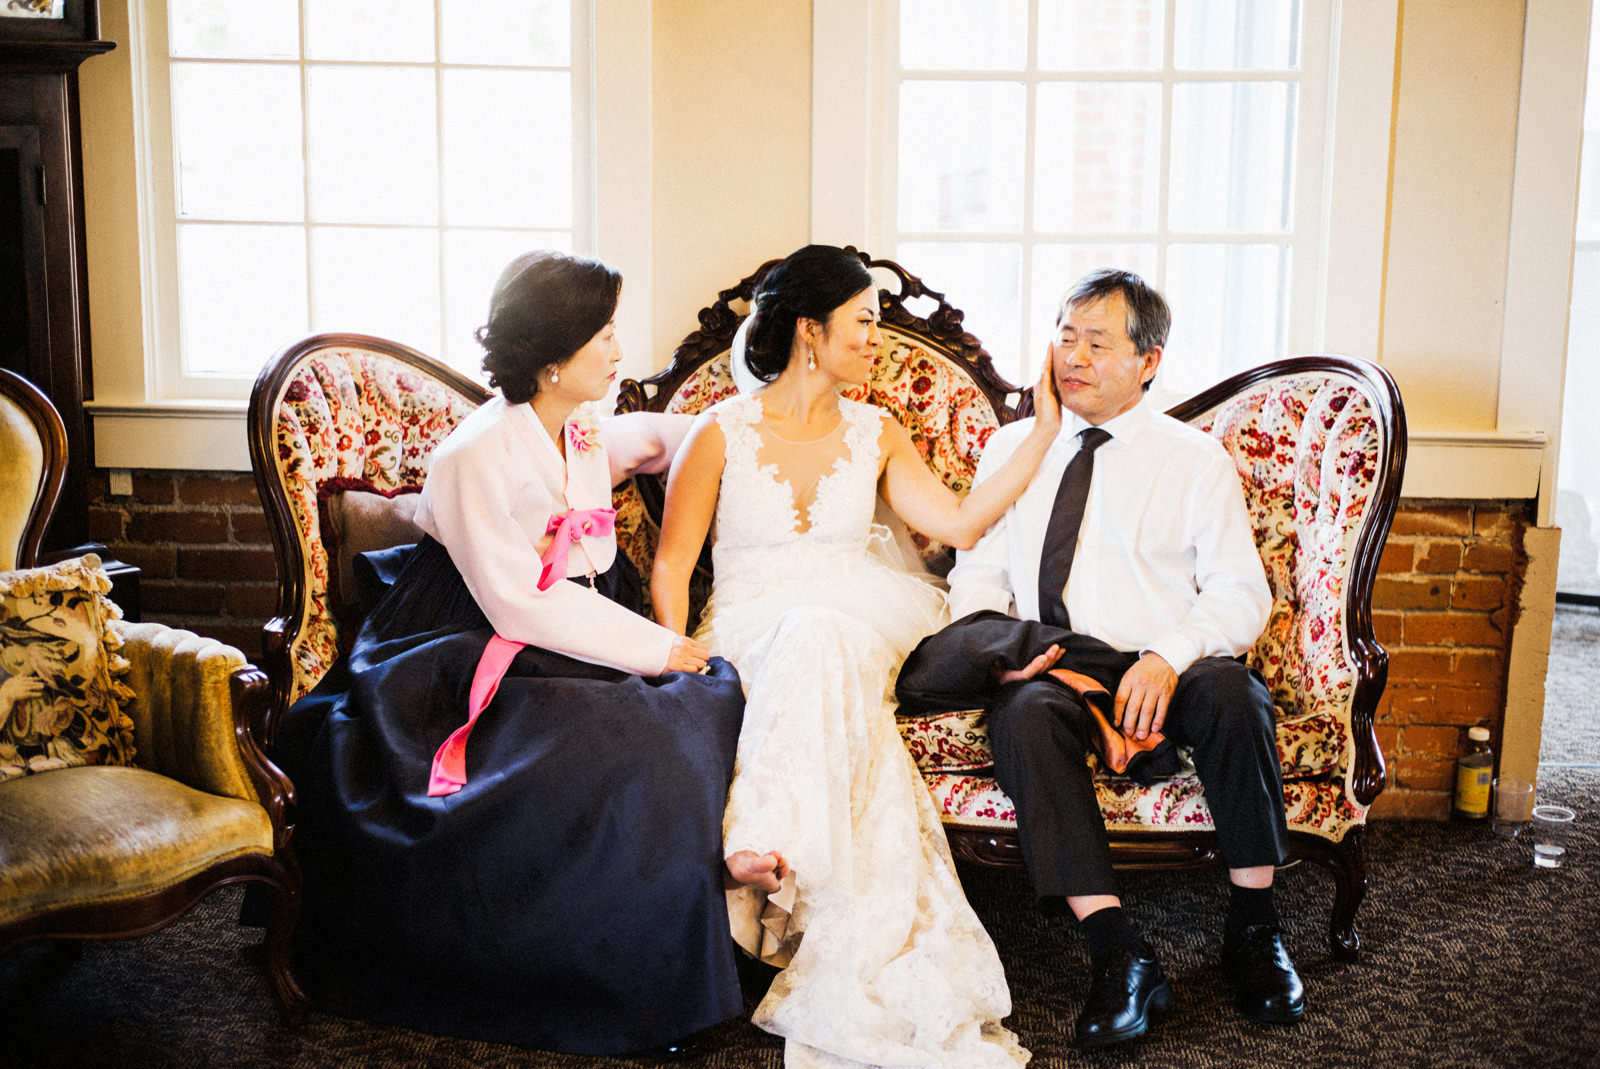 071-touching-moment-between-bride-and-parents-at-korean-wedding-by-ryan-flynn.jpg